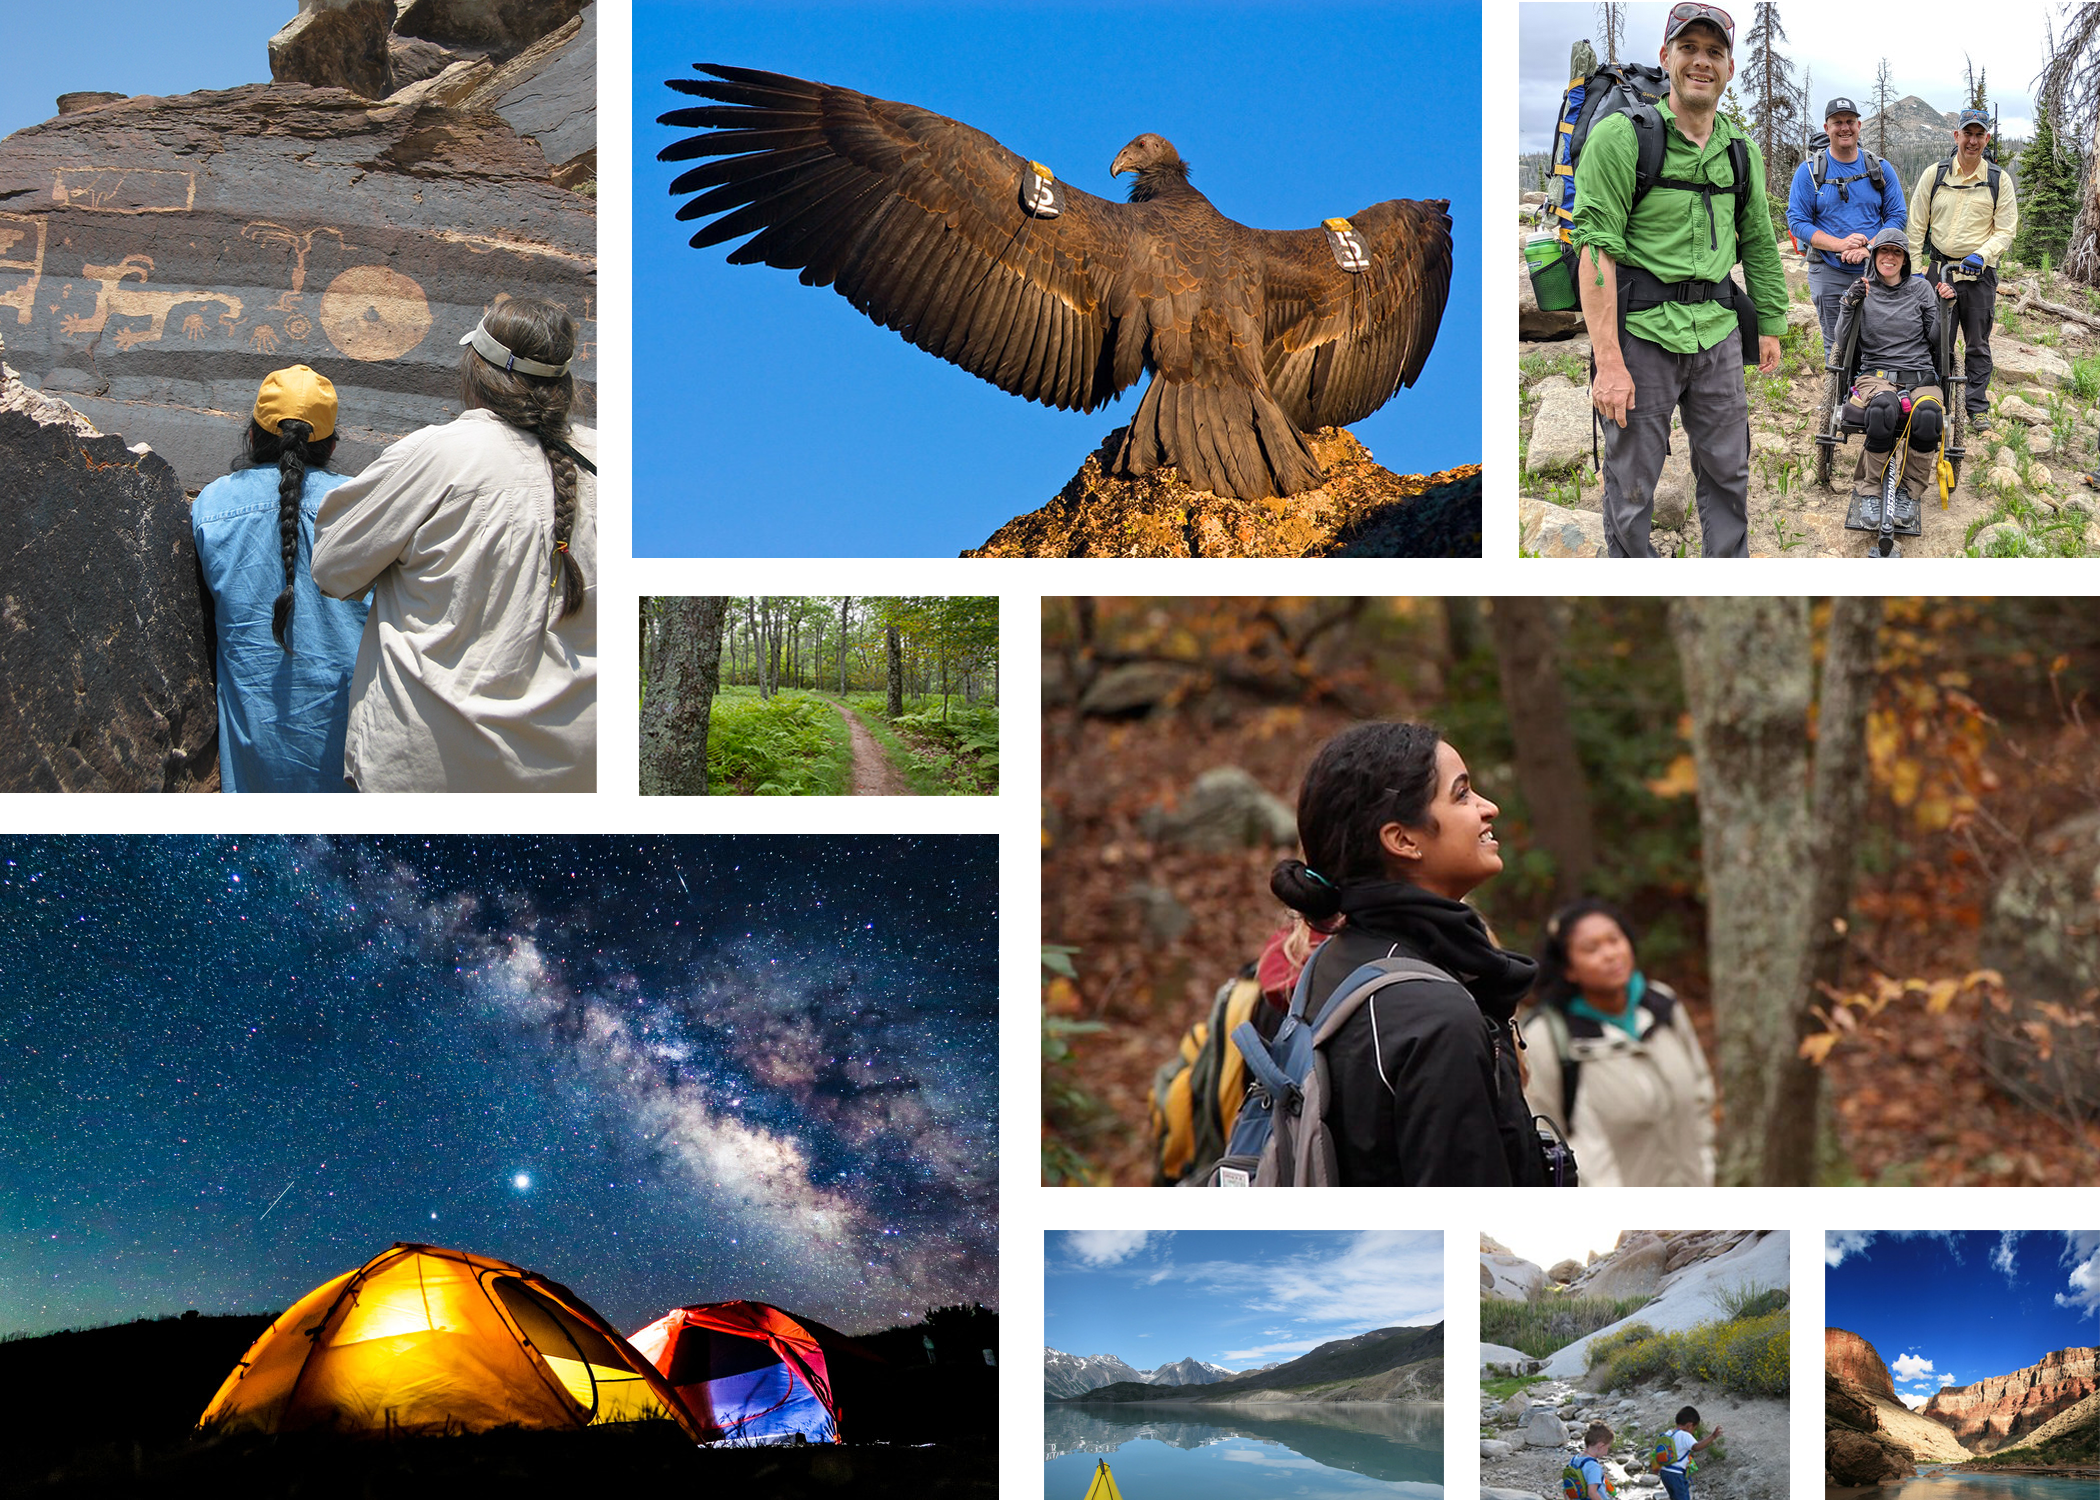 Collage of images featuring people and wildlife in different wilderness areas.